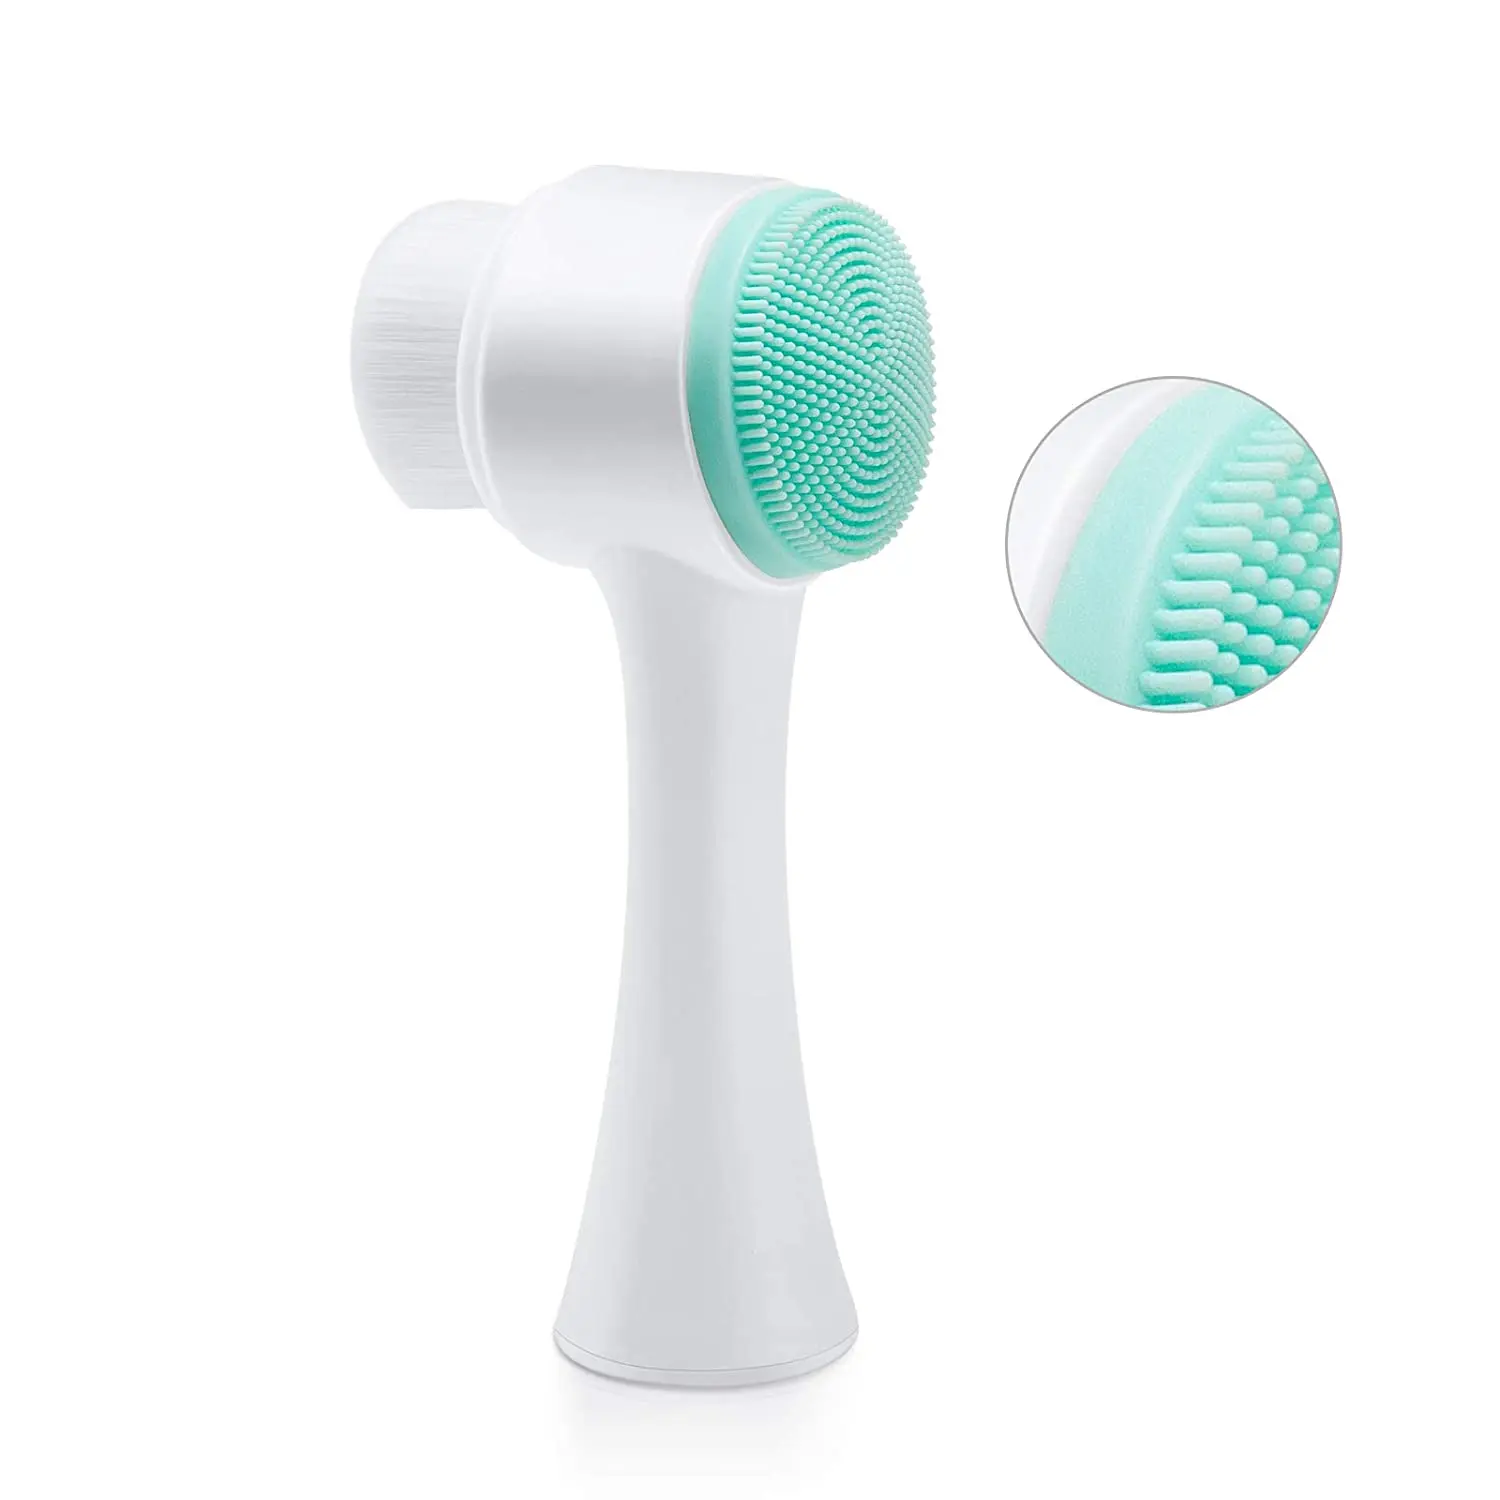 

Private Label Soft Facial Cleaning Brush Scrubber Deep Pore Exfoliation Makeup Massaging Silicone Manual Dual Face Wash Brush, As shown (optional)